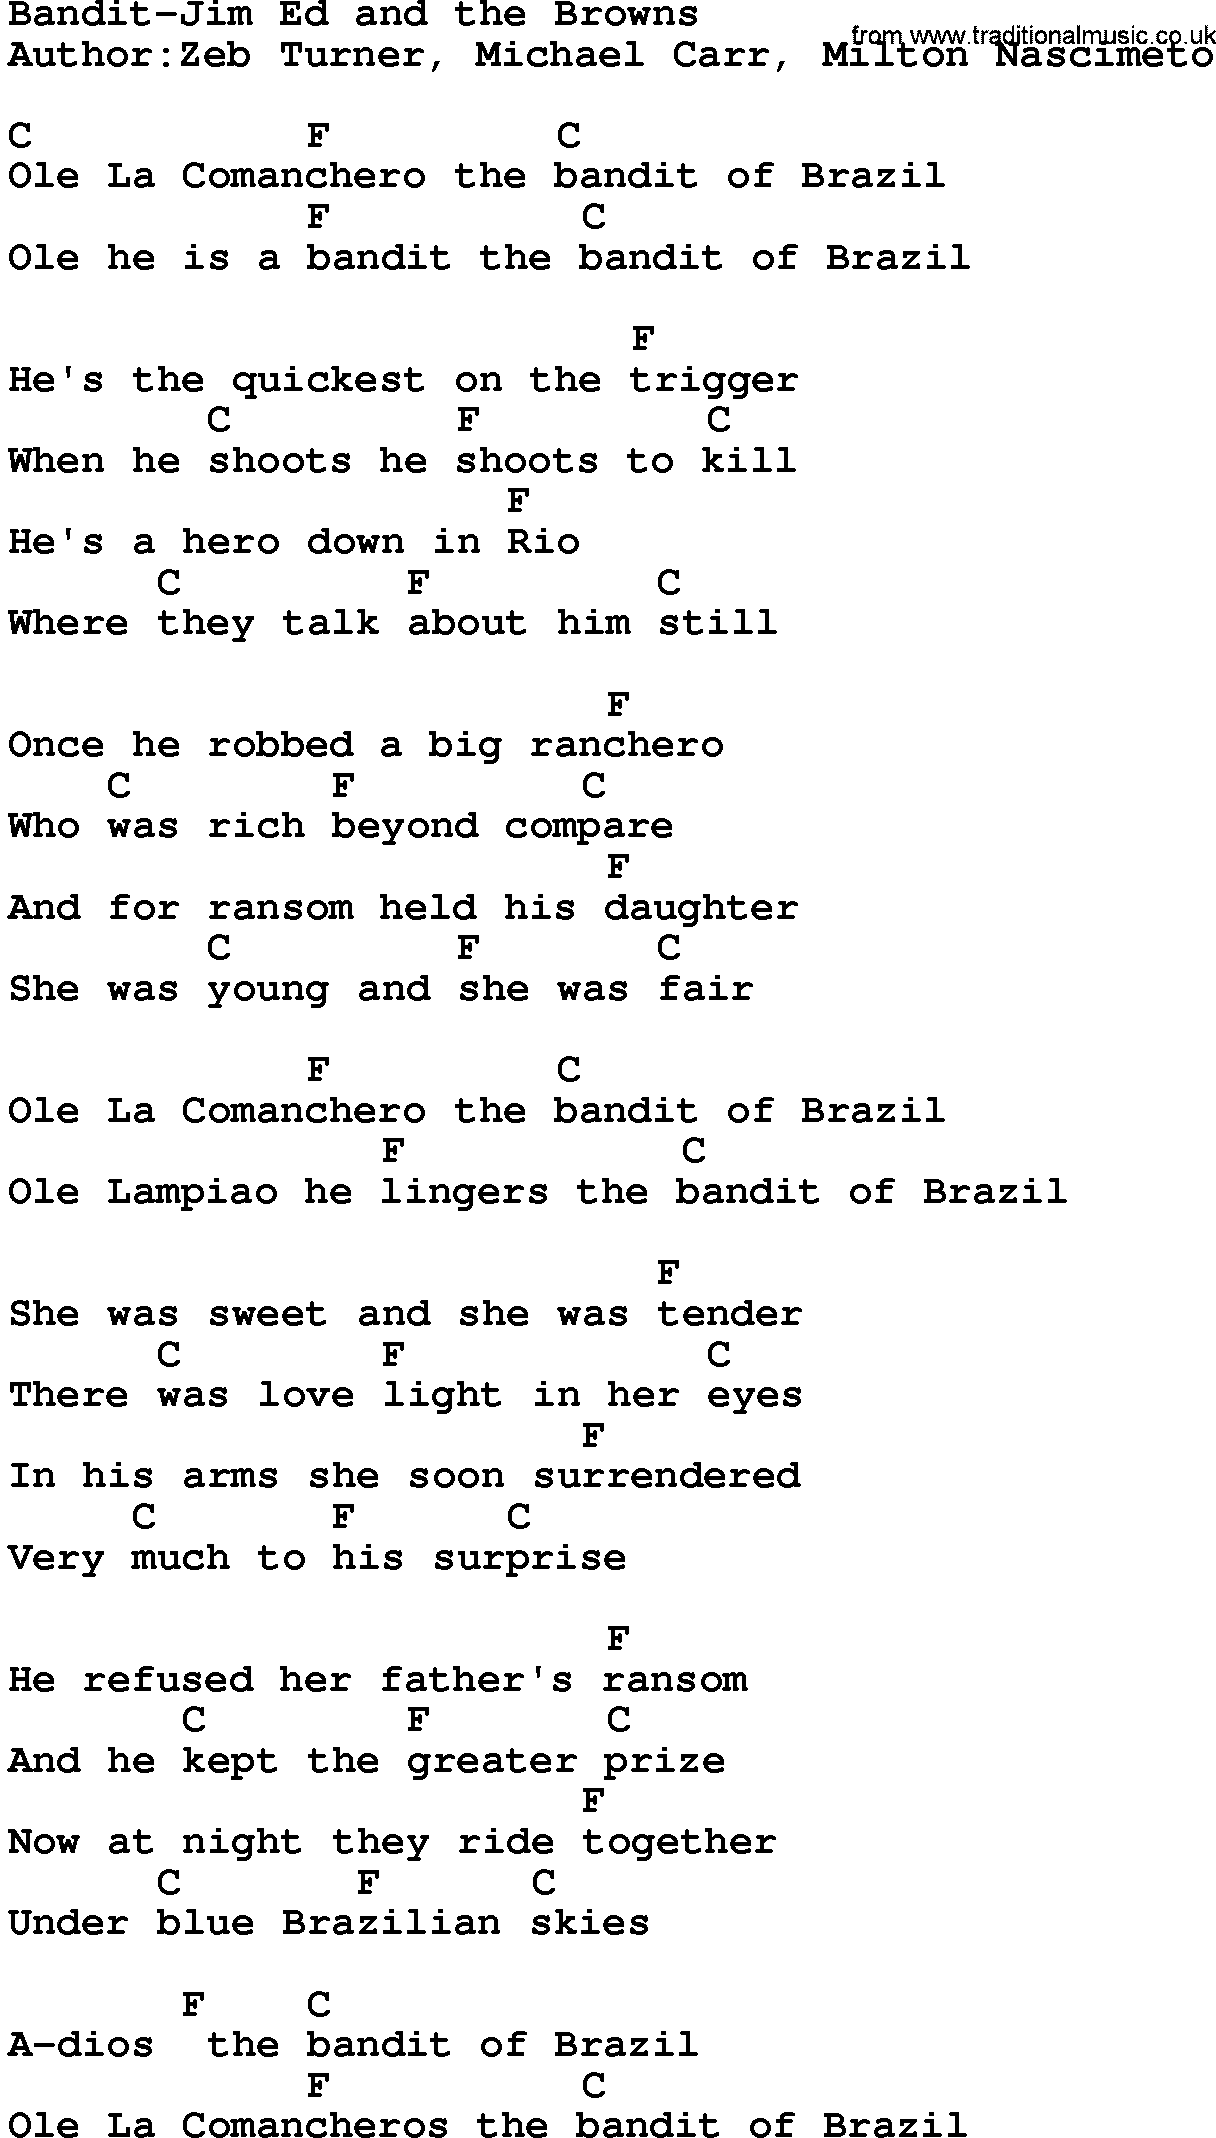 Country music song: Bandit-Jim Ed And The Browns lyrics and chords